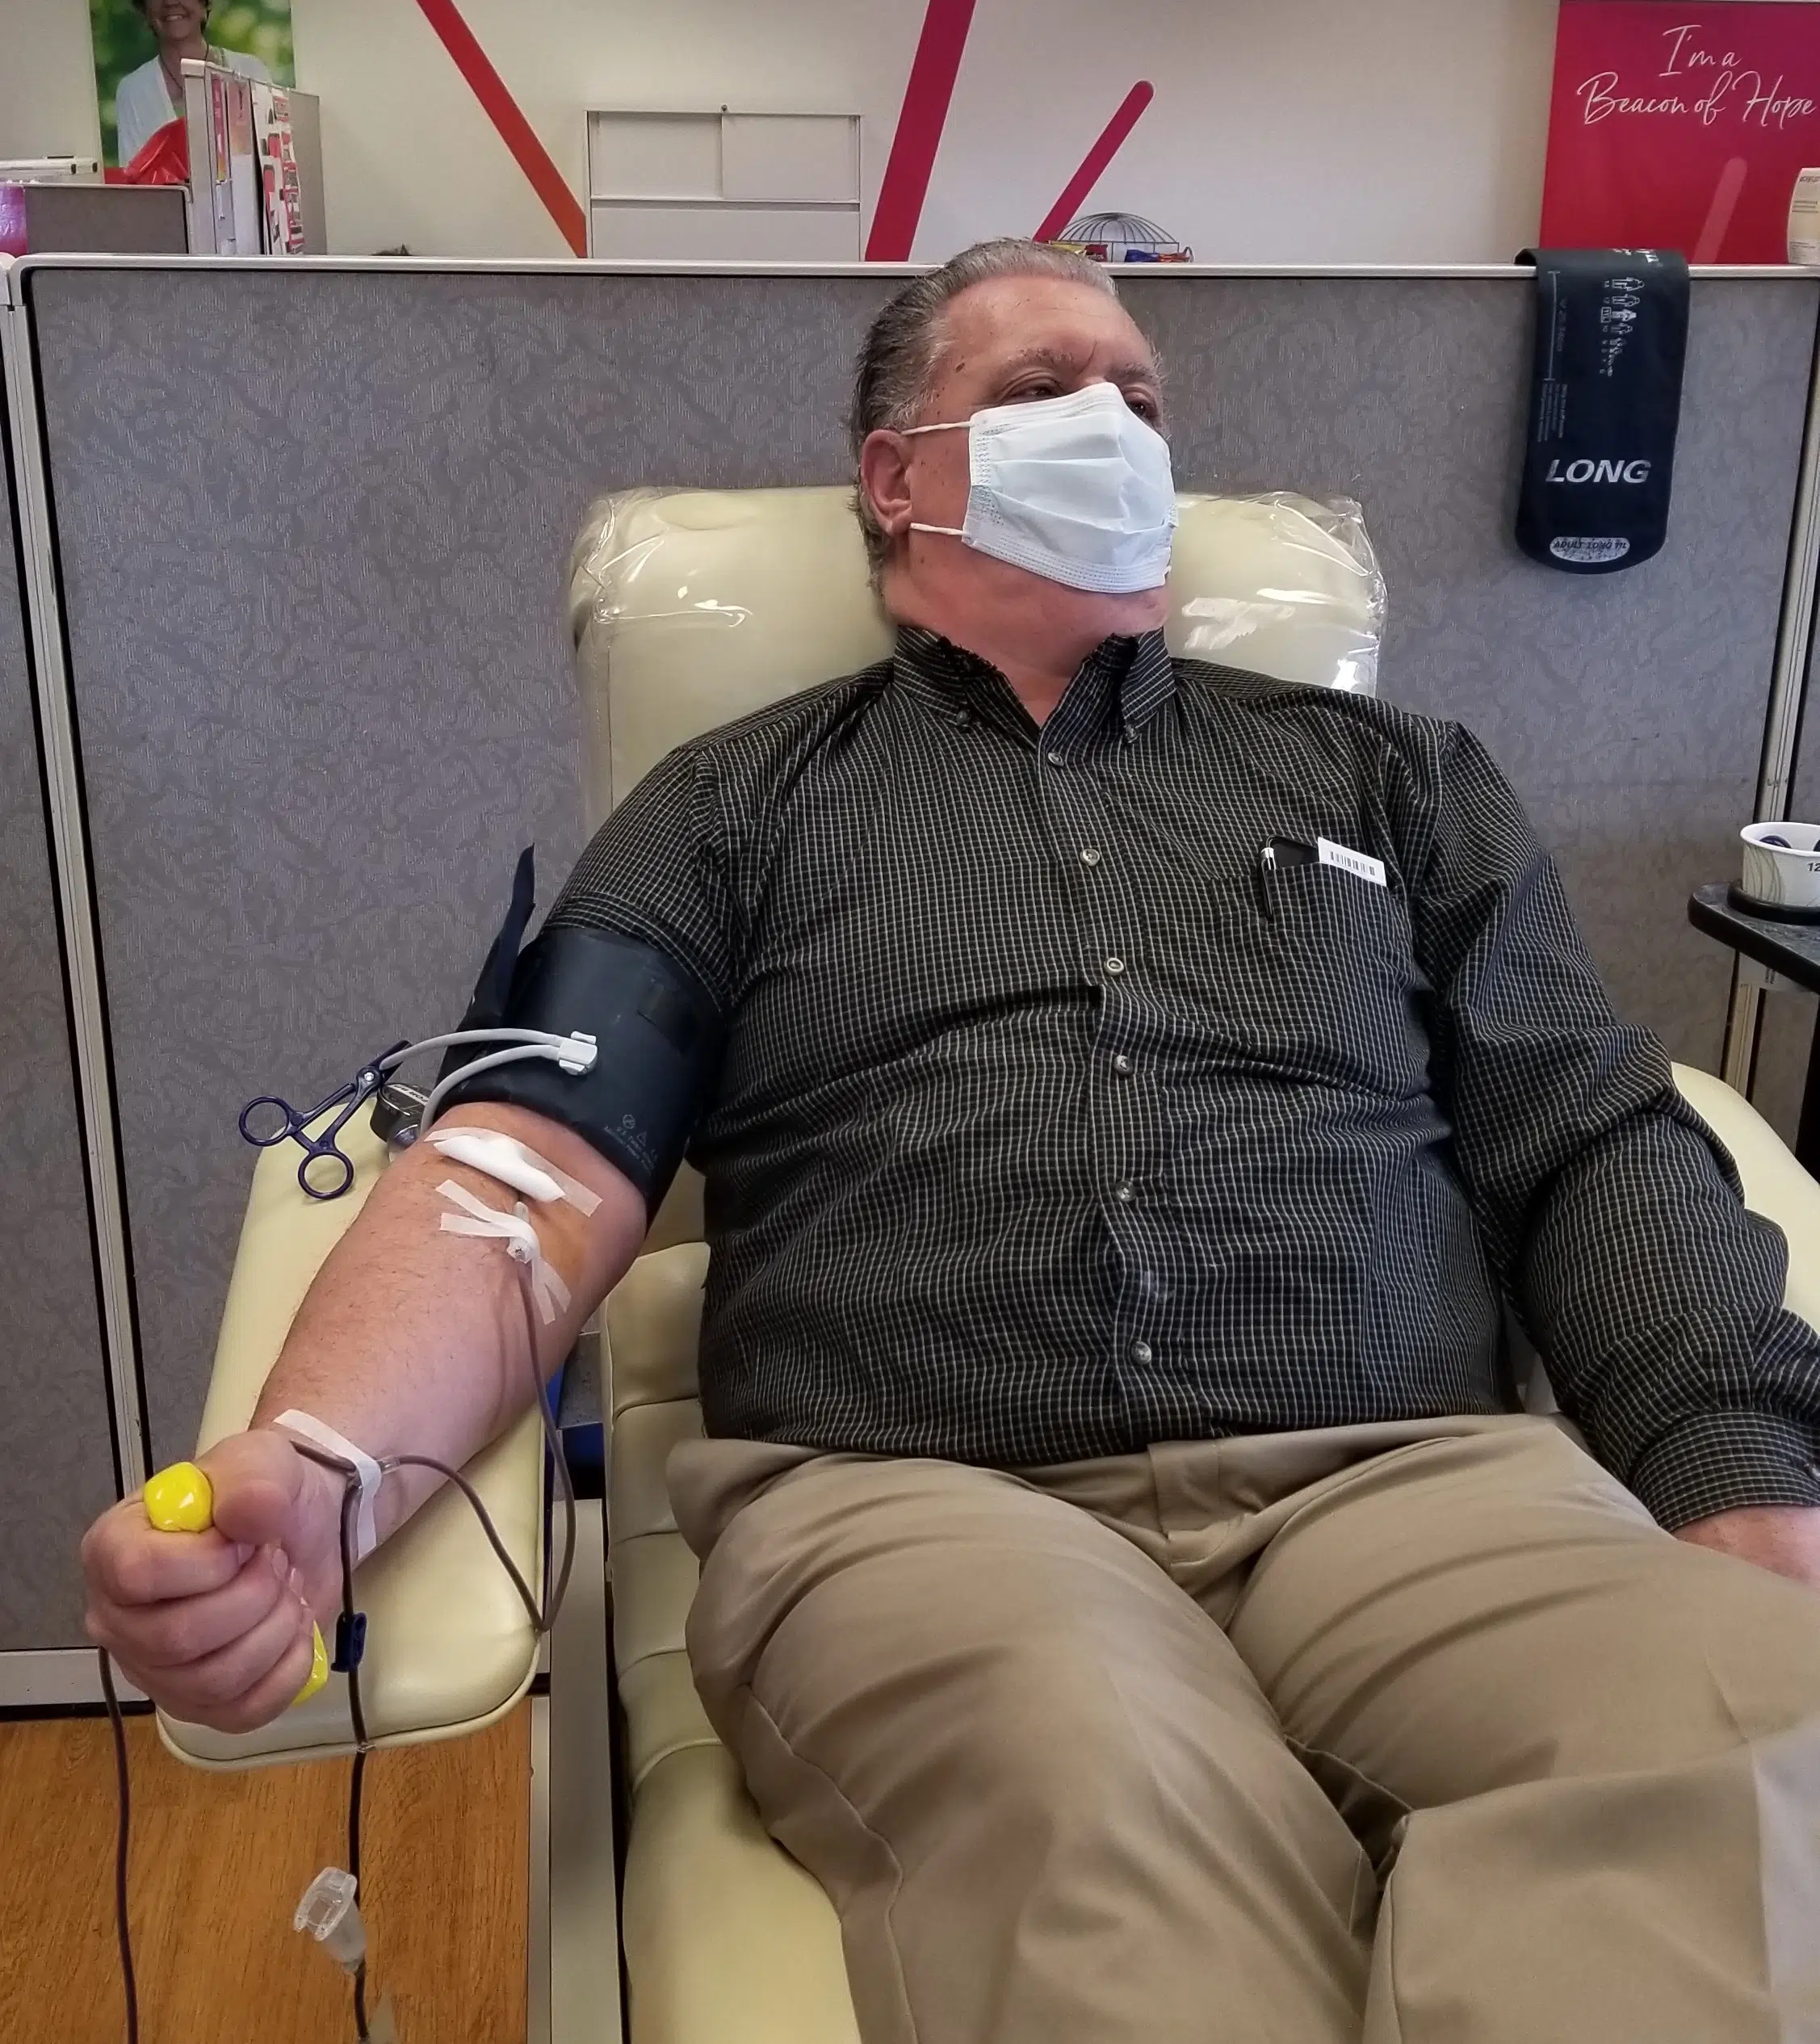 Blood Crisis Continues, Two Drives Scheduled in Manitowoc This Month